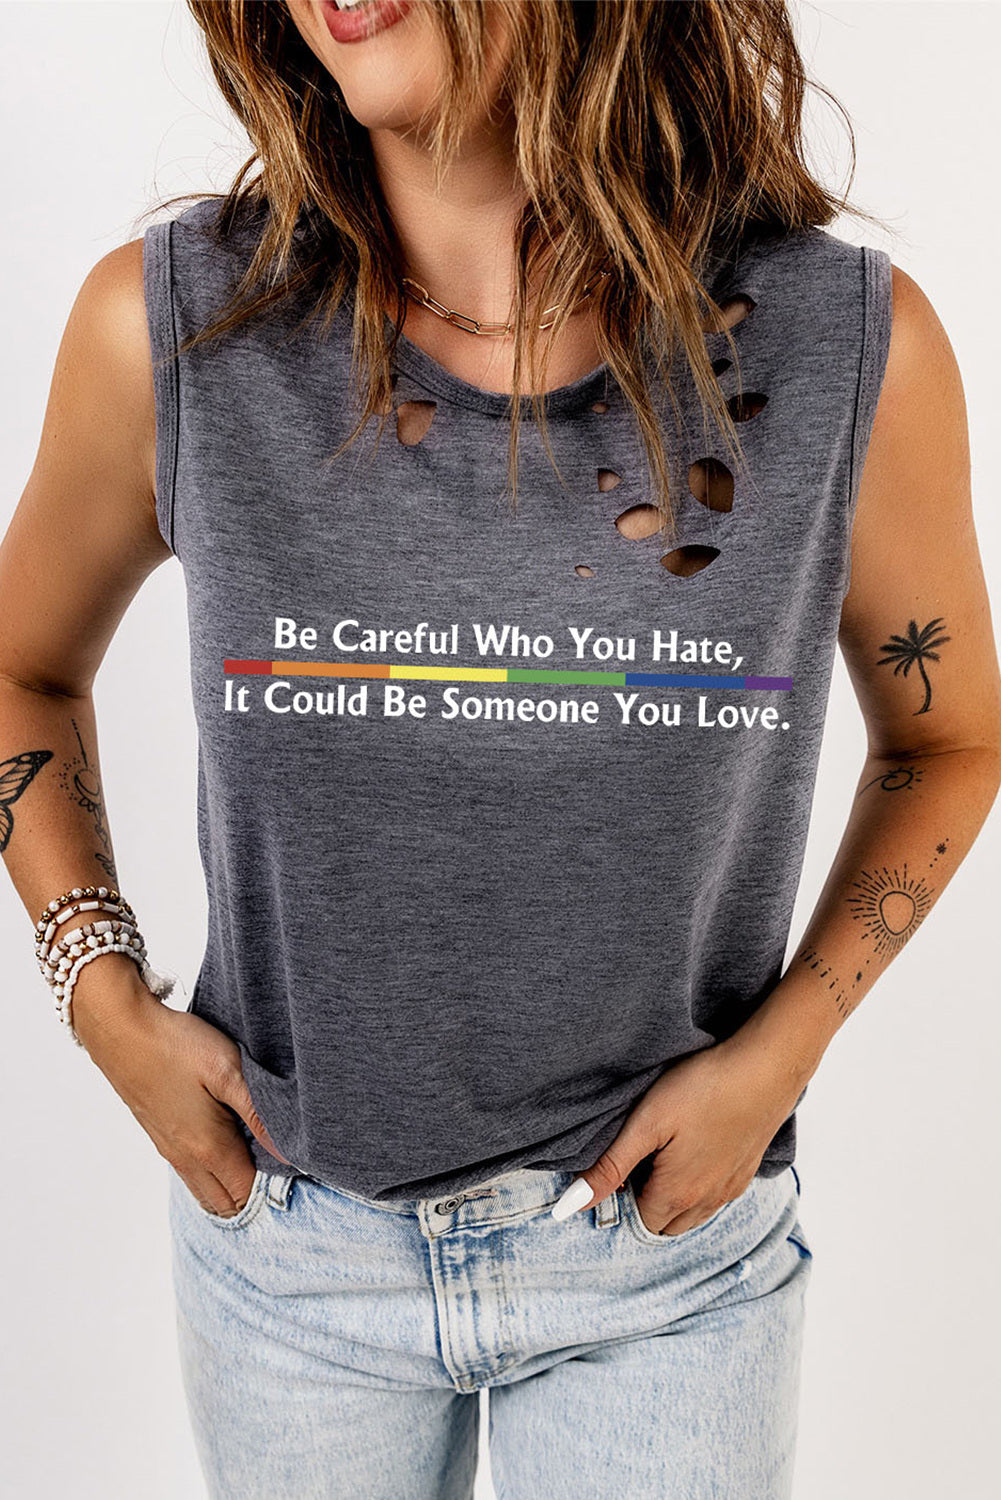 LC2569589-11-S, LC2569589-11-M, LC2569589-11-L, LC2569589-11-XL, LC2569589-11-2XL, Gray Womens Gay Pride Be Careful Who You Hate It Be Someone You Love Distressed LGBT Tank Top